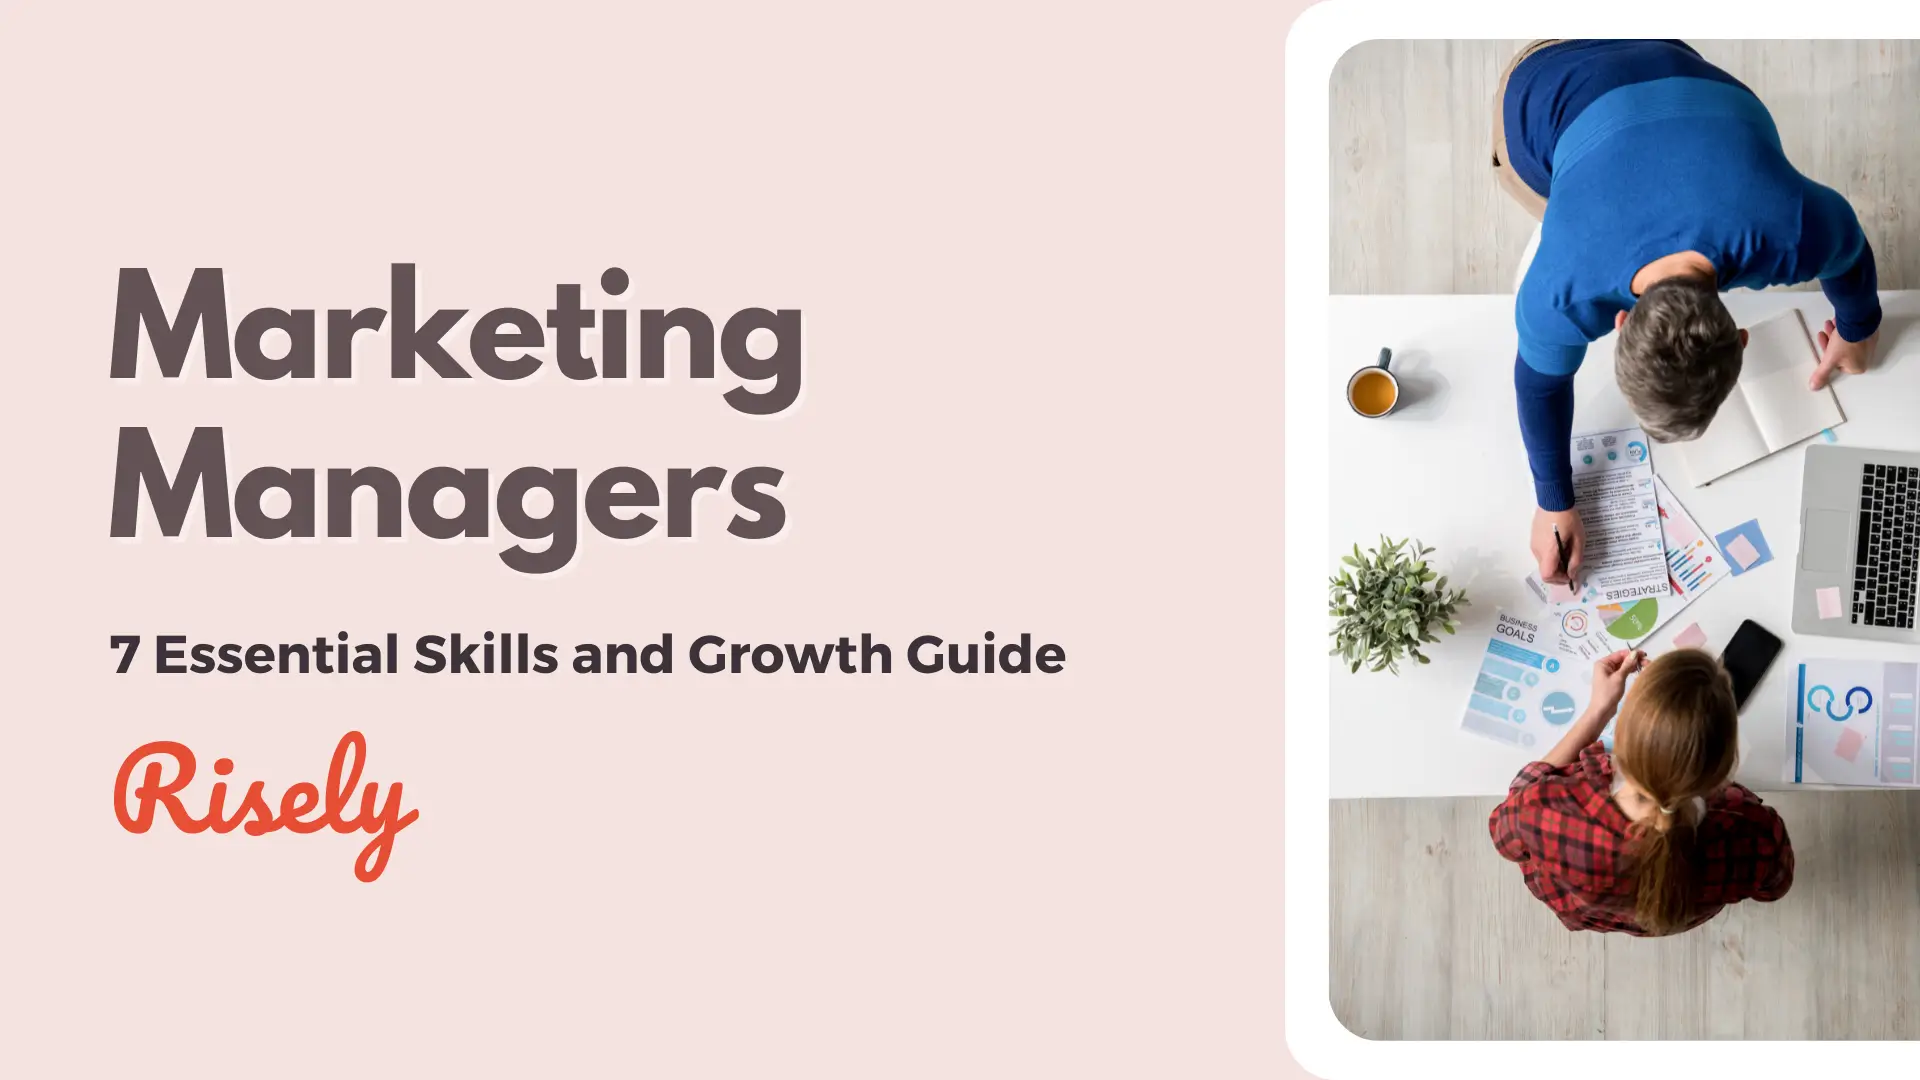 Marketing Managers: 7 Essential Skills and Growth Guide